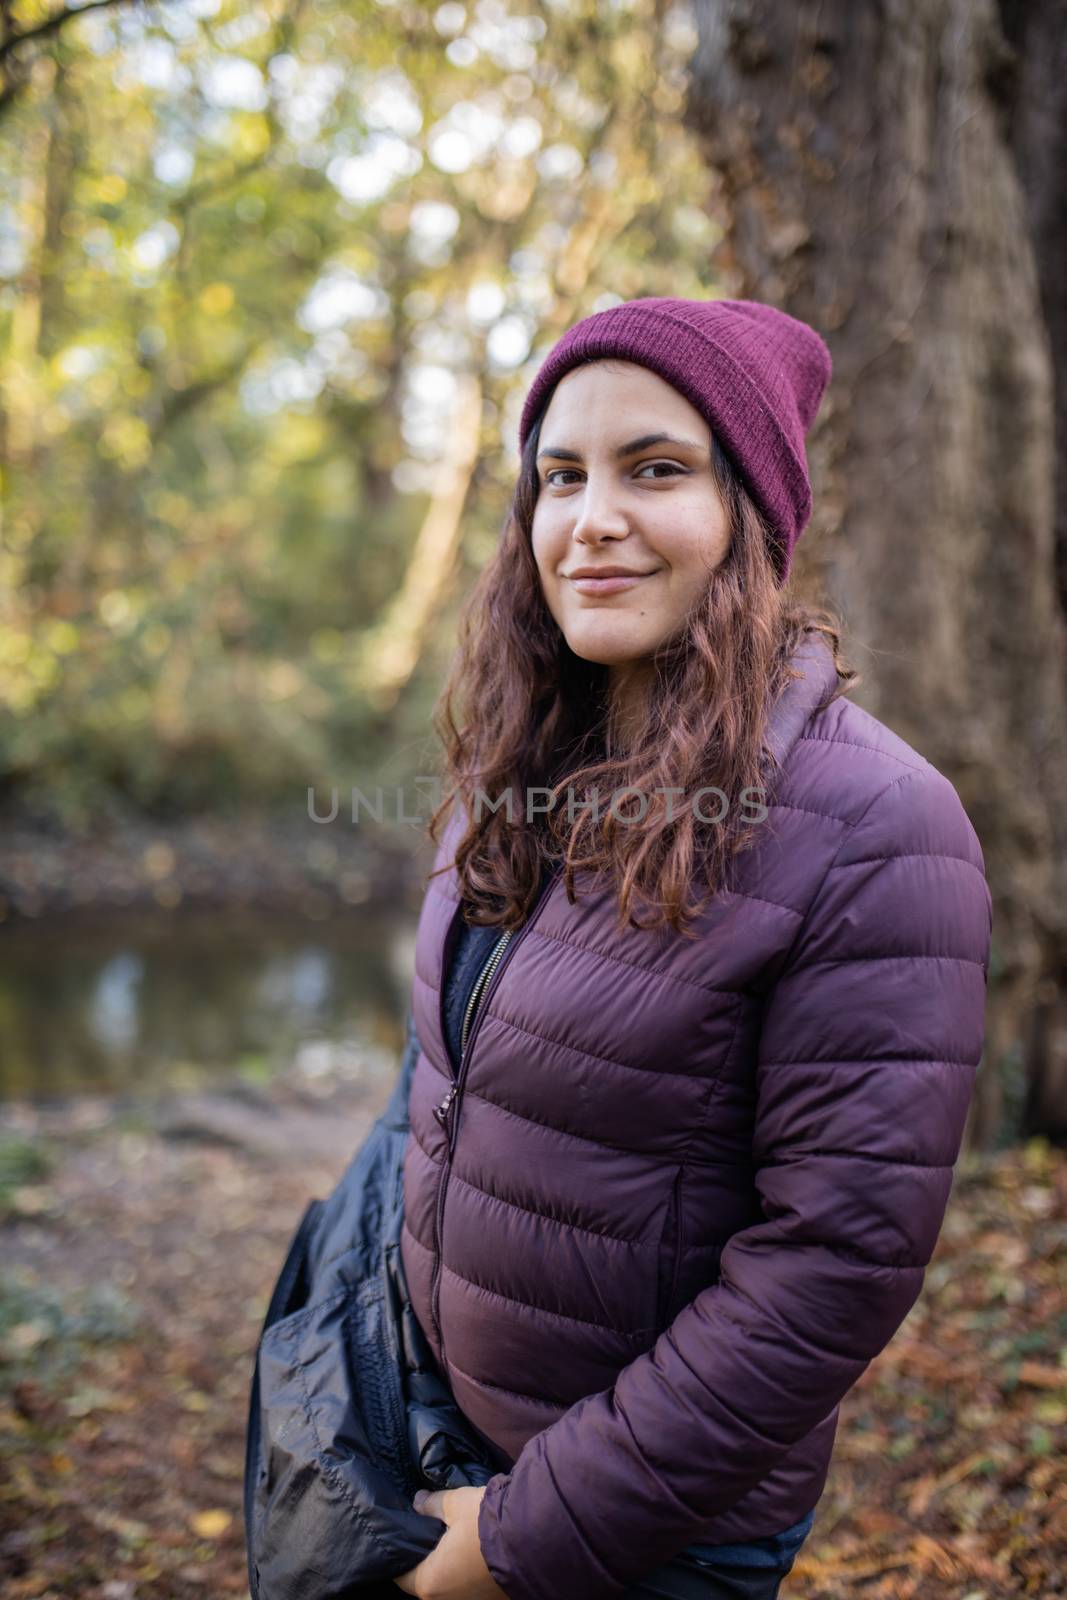 Happy woman with serene smile in the forest with a river as background. Portrait of woman wearing knitted hat in forest. Adventurous day in nature